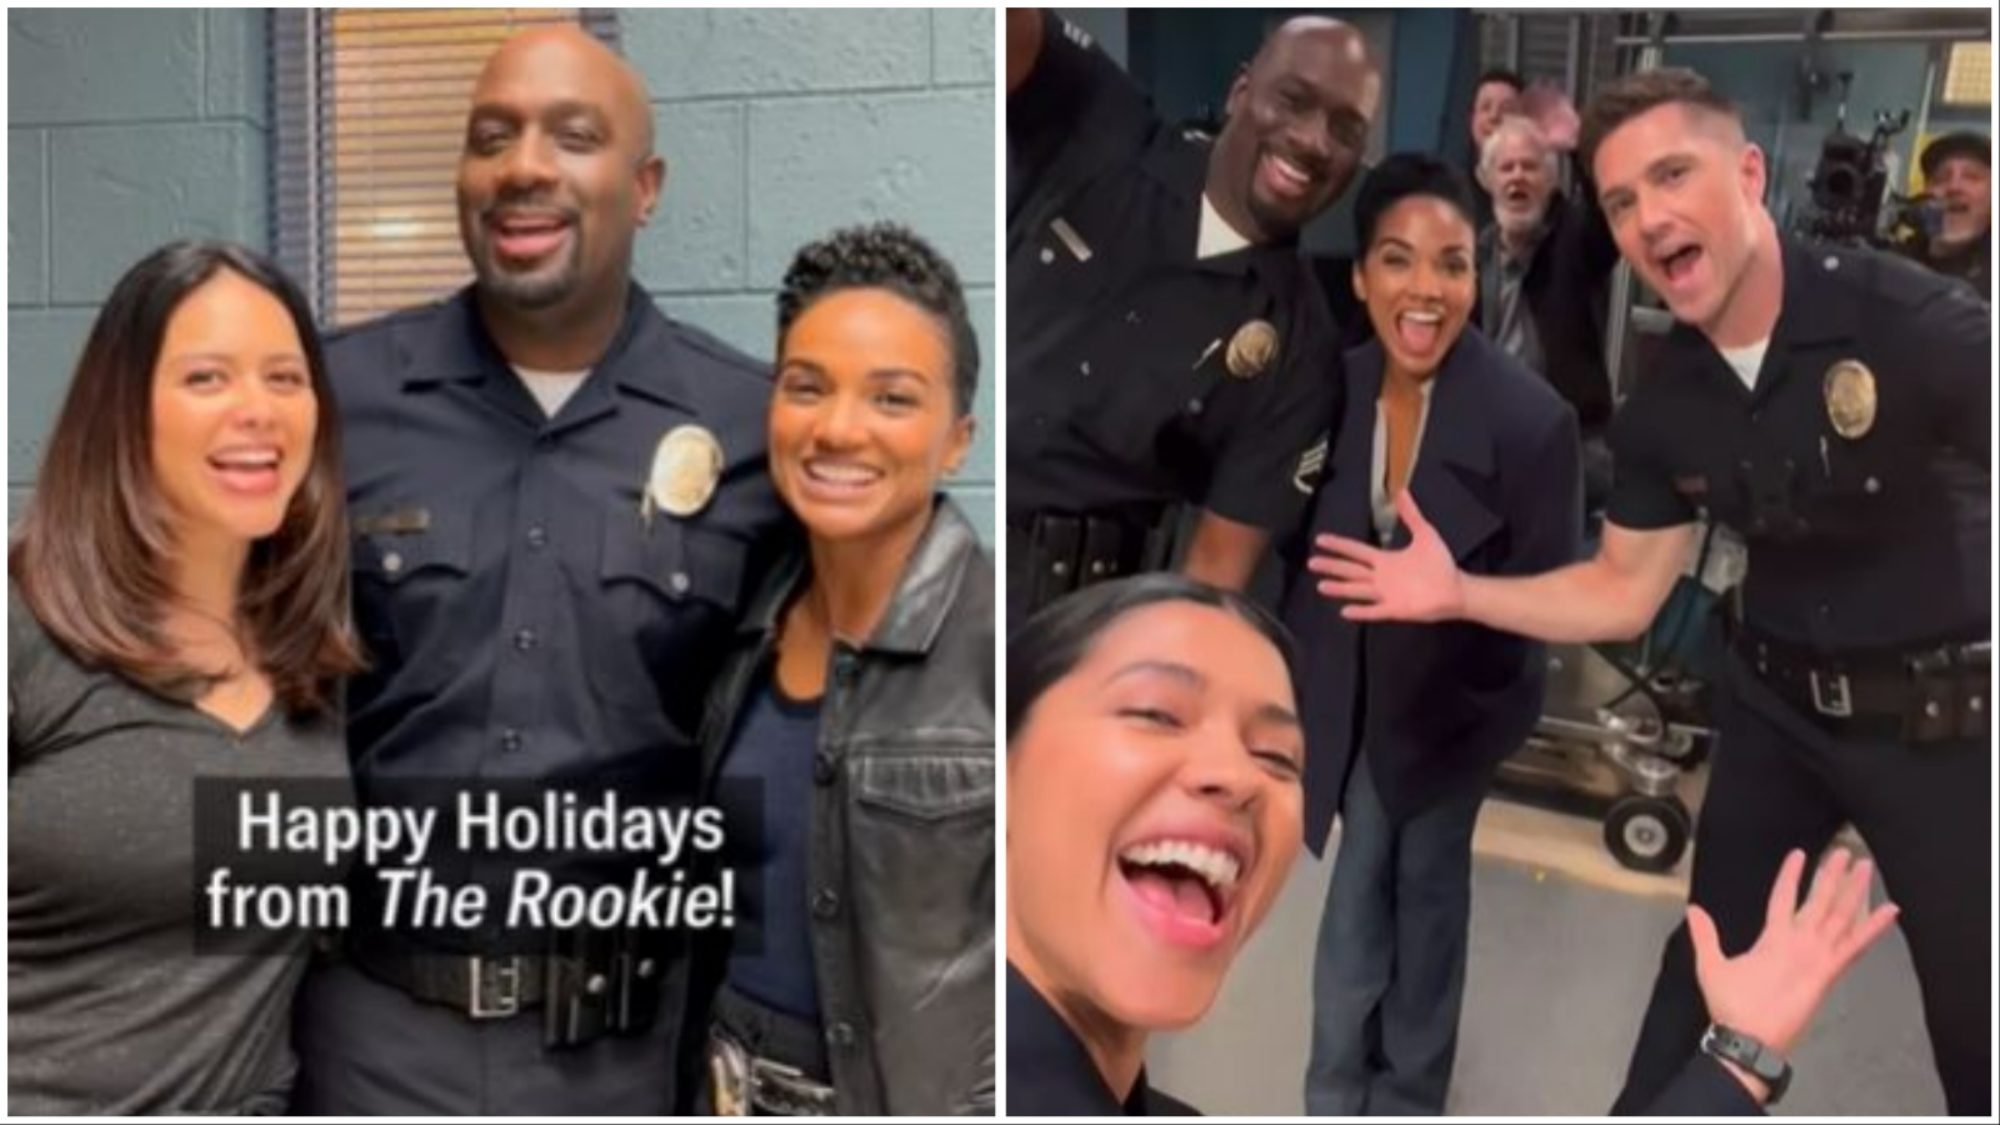 The Rookie (@therookieabc) • Instagram photos and videos